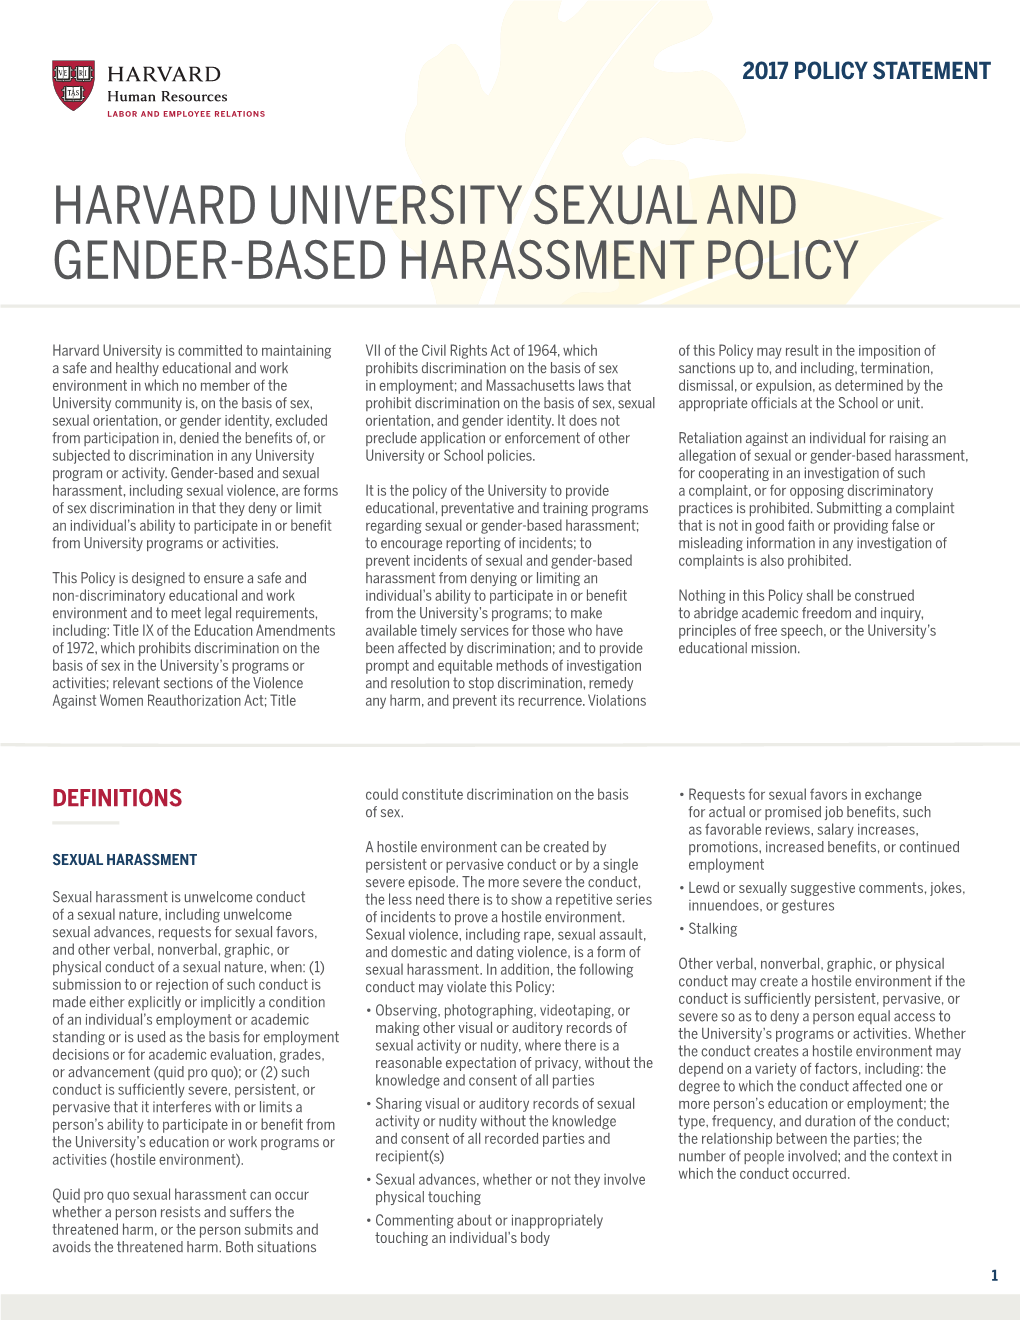 Harvard University Sexual and Gender-Based Harassment Policy